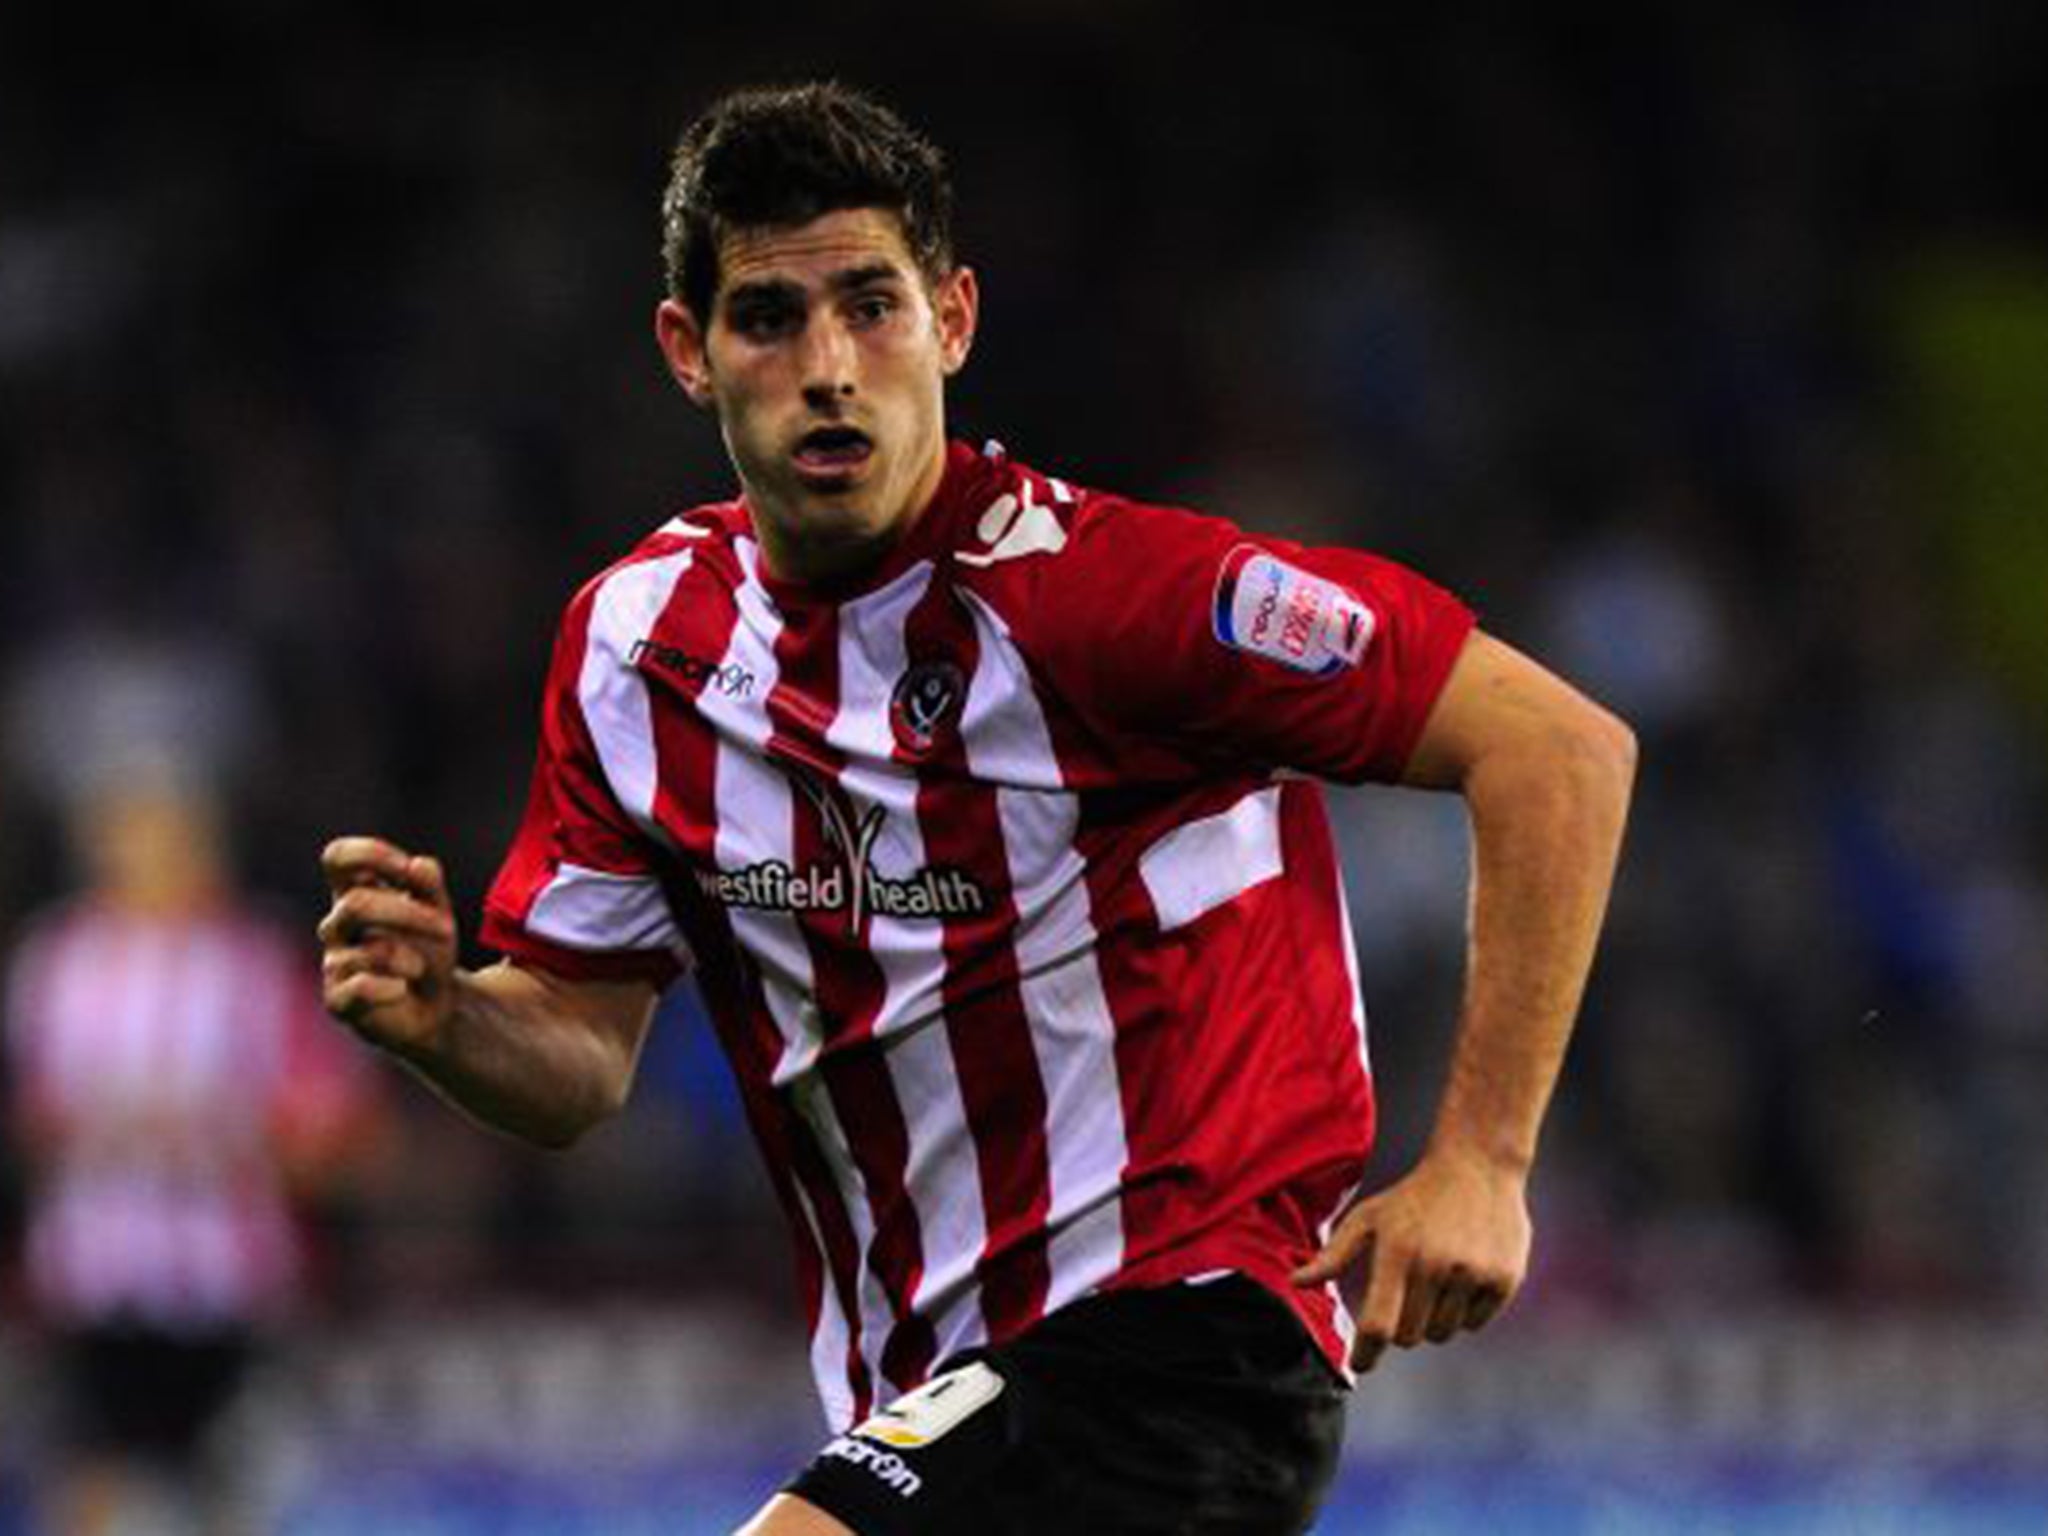 The prospect of signing Ched Evans has led several Oldham sponsors to threaten to quit (Getty)